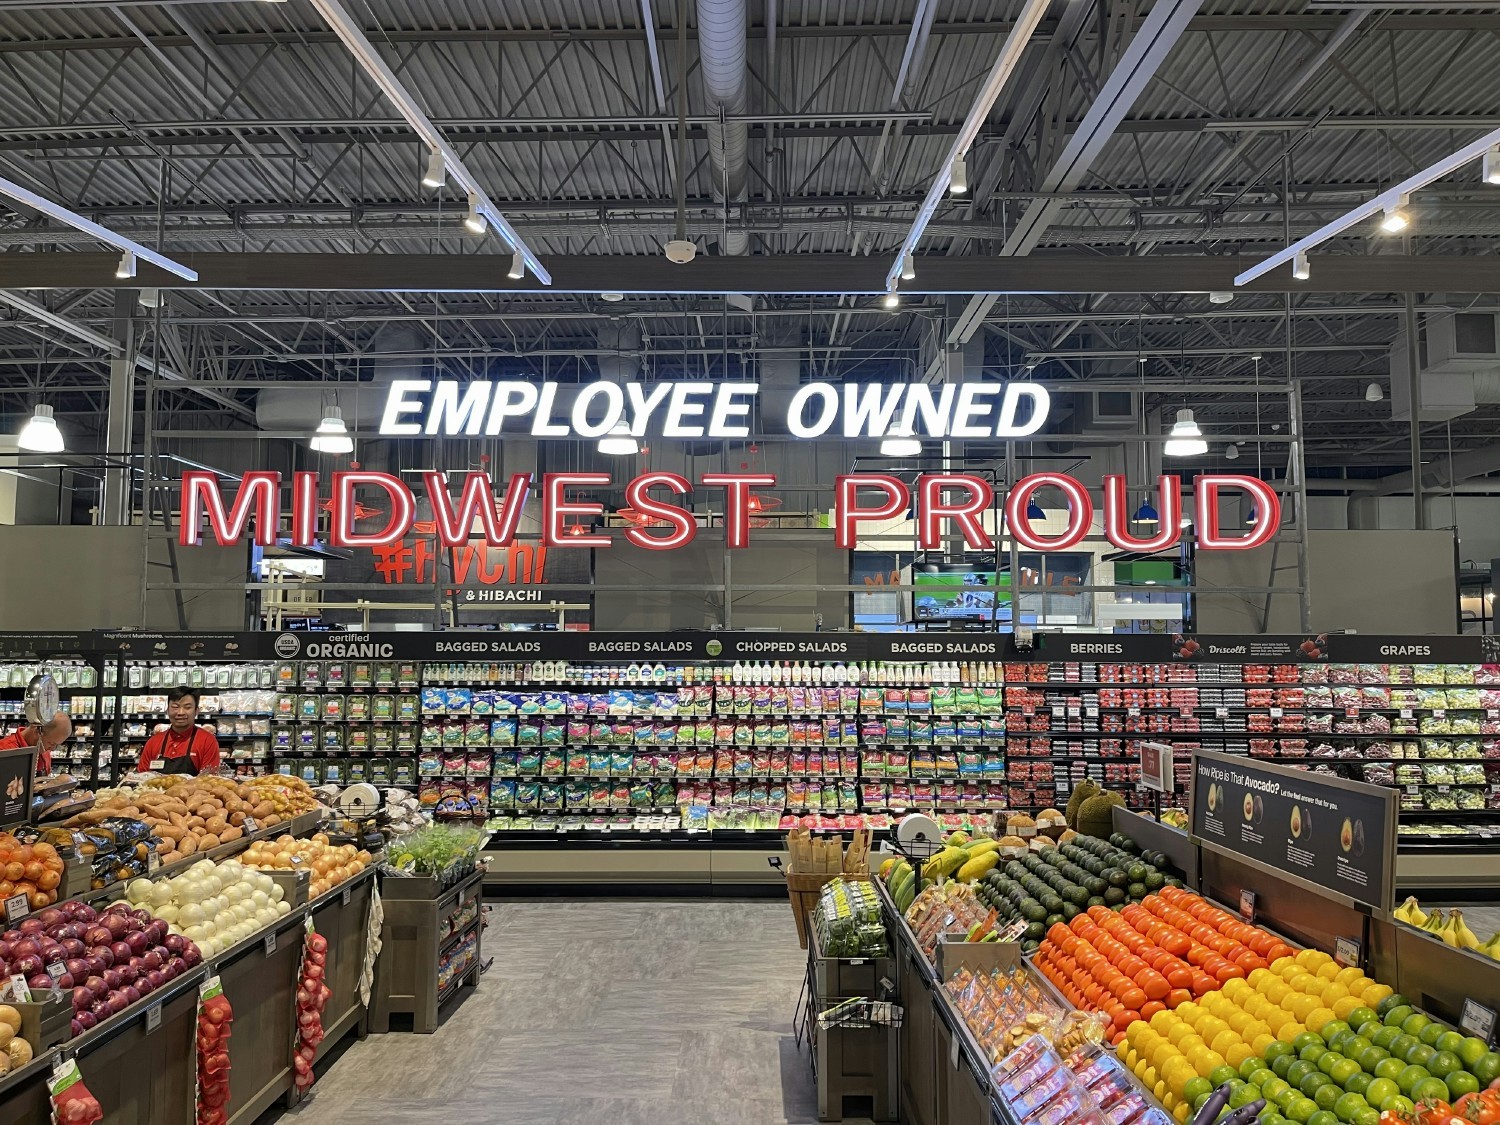 The produce department at the Hy-Vee in Grimes, Iowa.